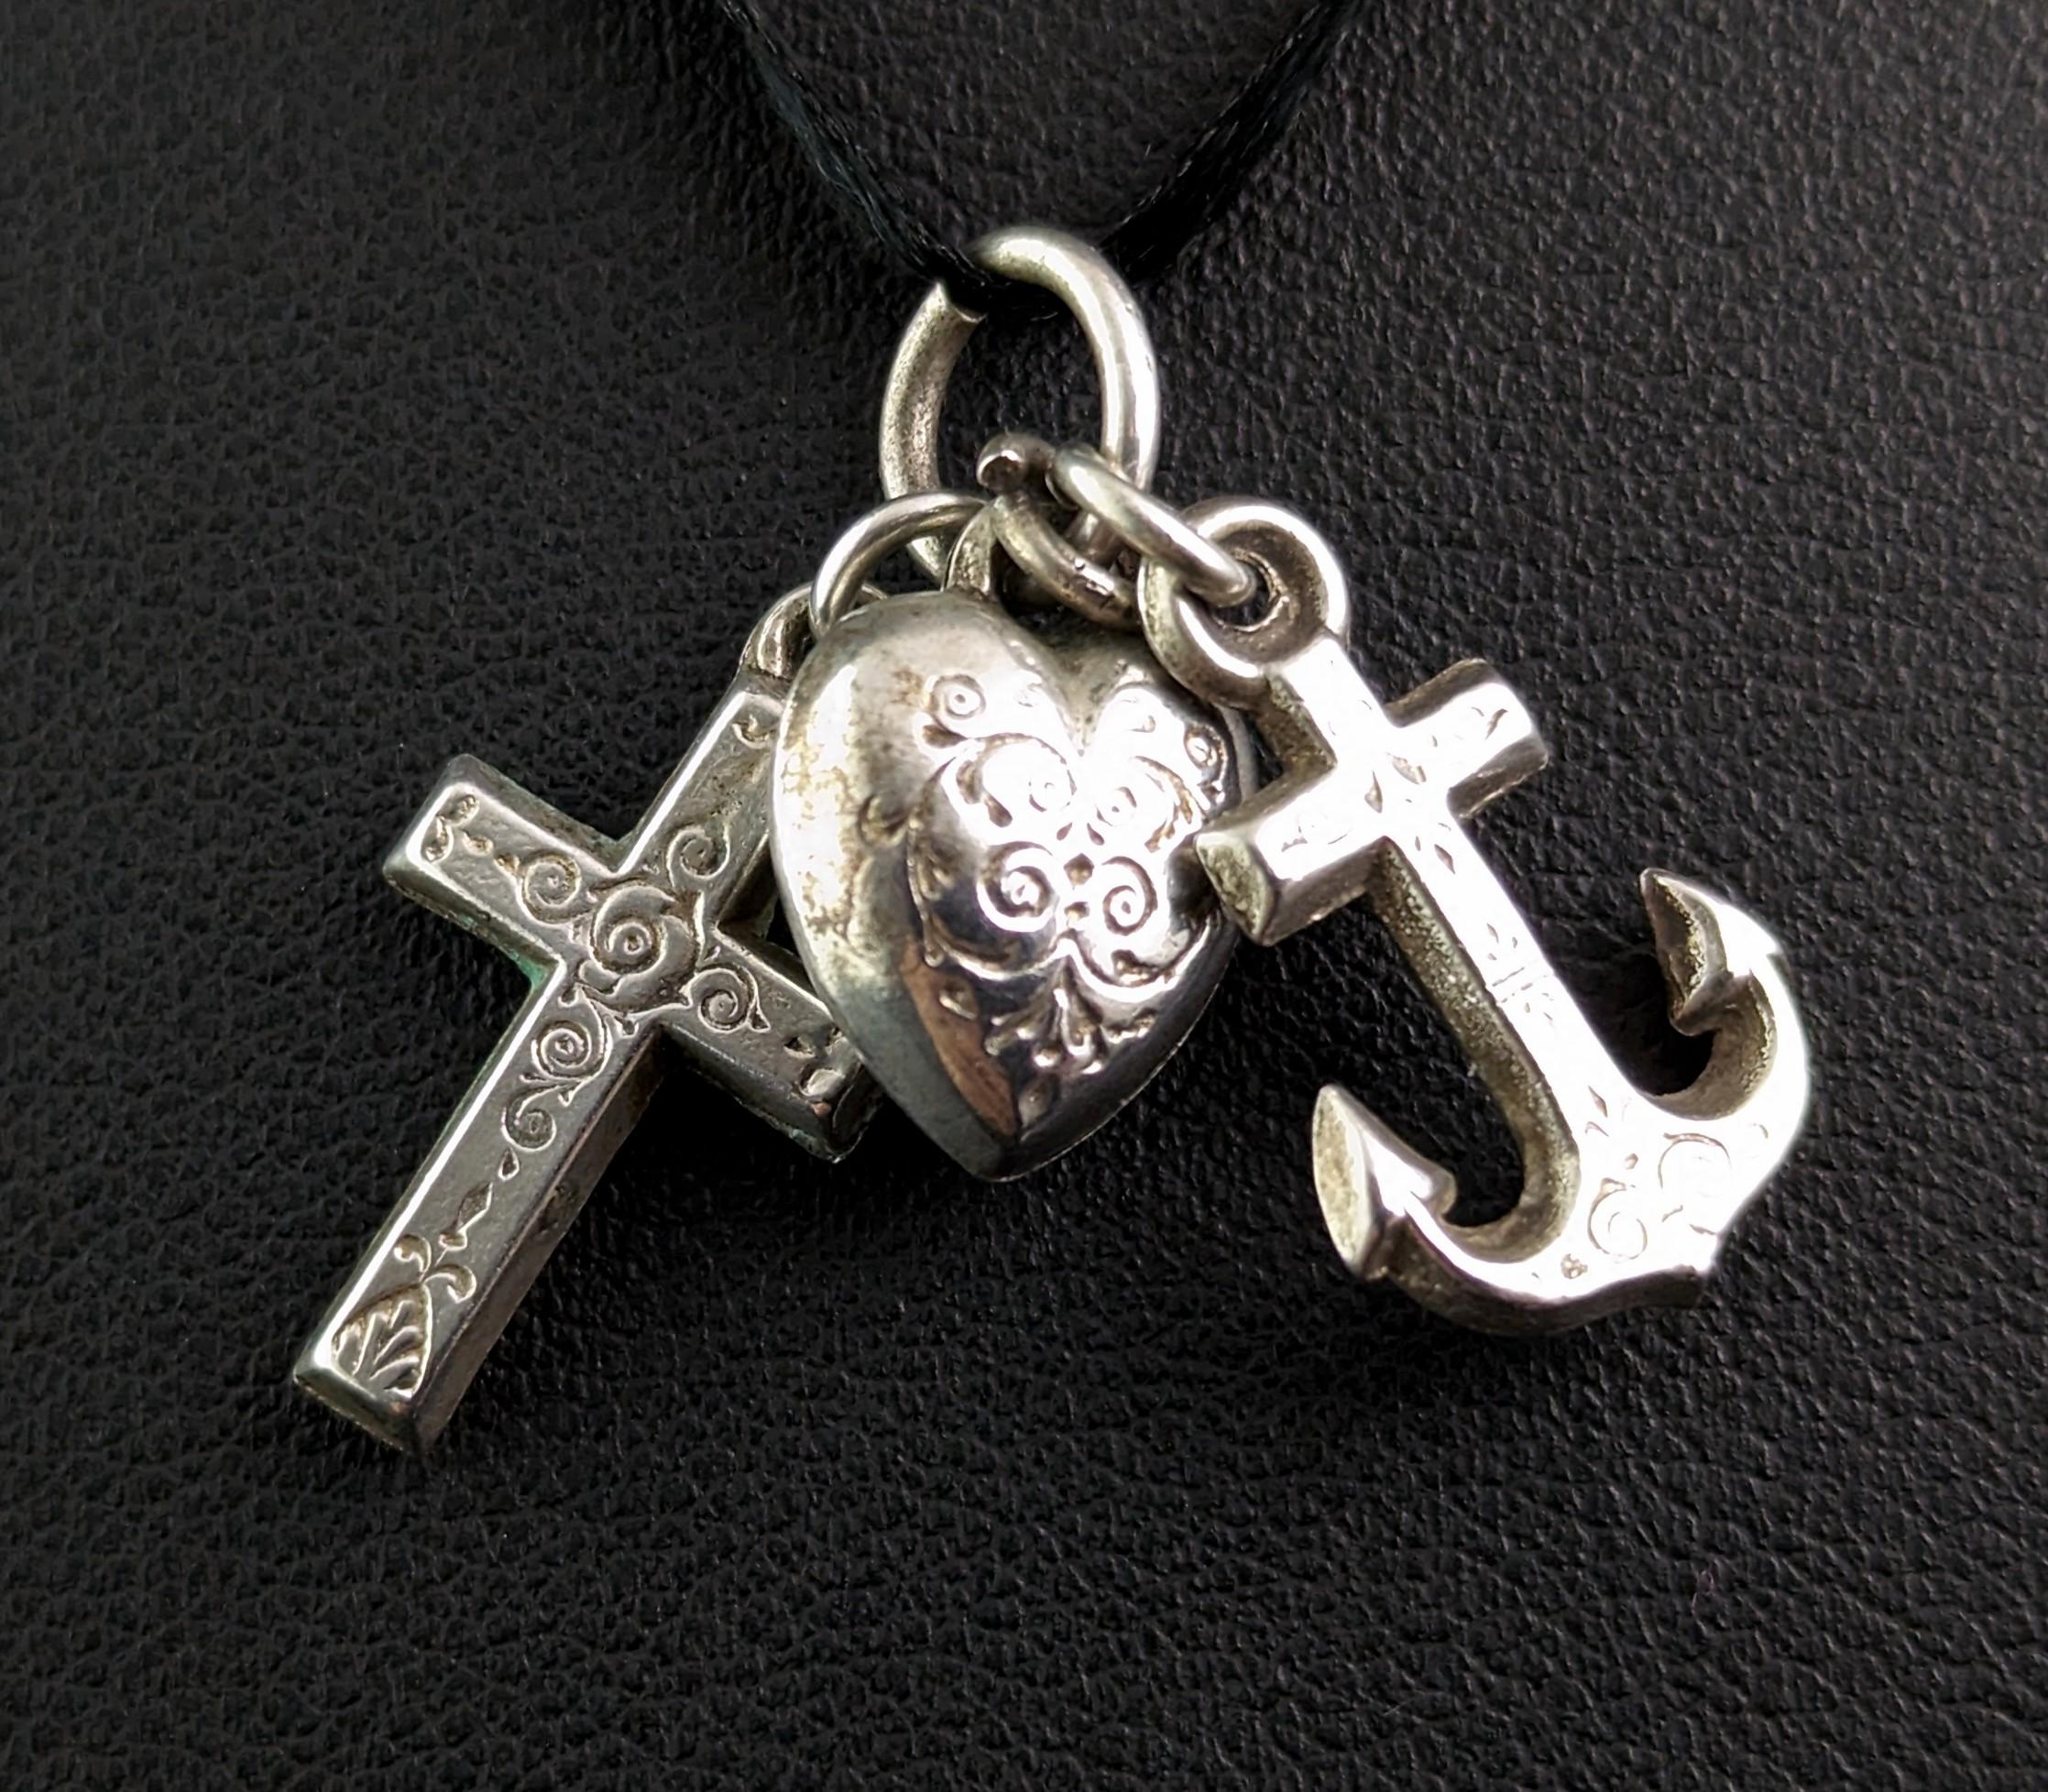 This sweet little antique Faith, Hope and Charity charm is embued with Victorian symbolism.

Each piece is finely engraved back and front giving a wonderfully detailed touch, the charm would also make a great dainty pendant to hang from a fine